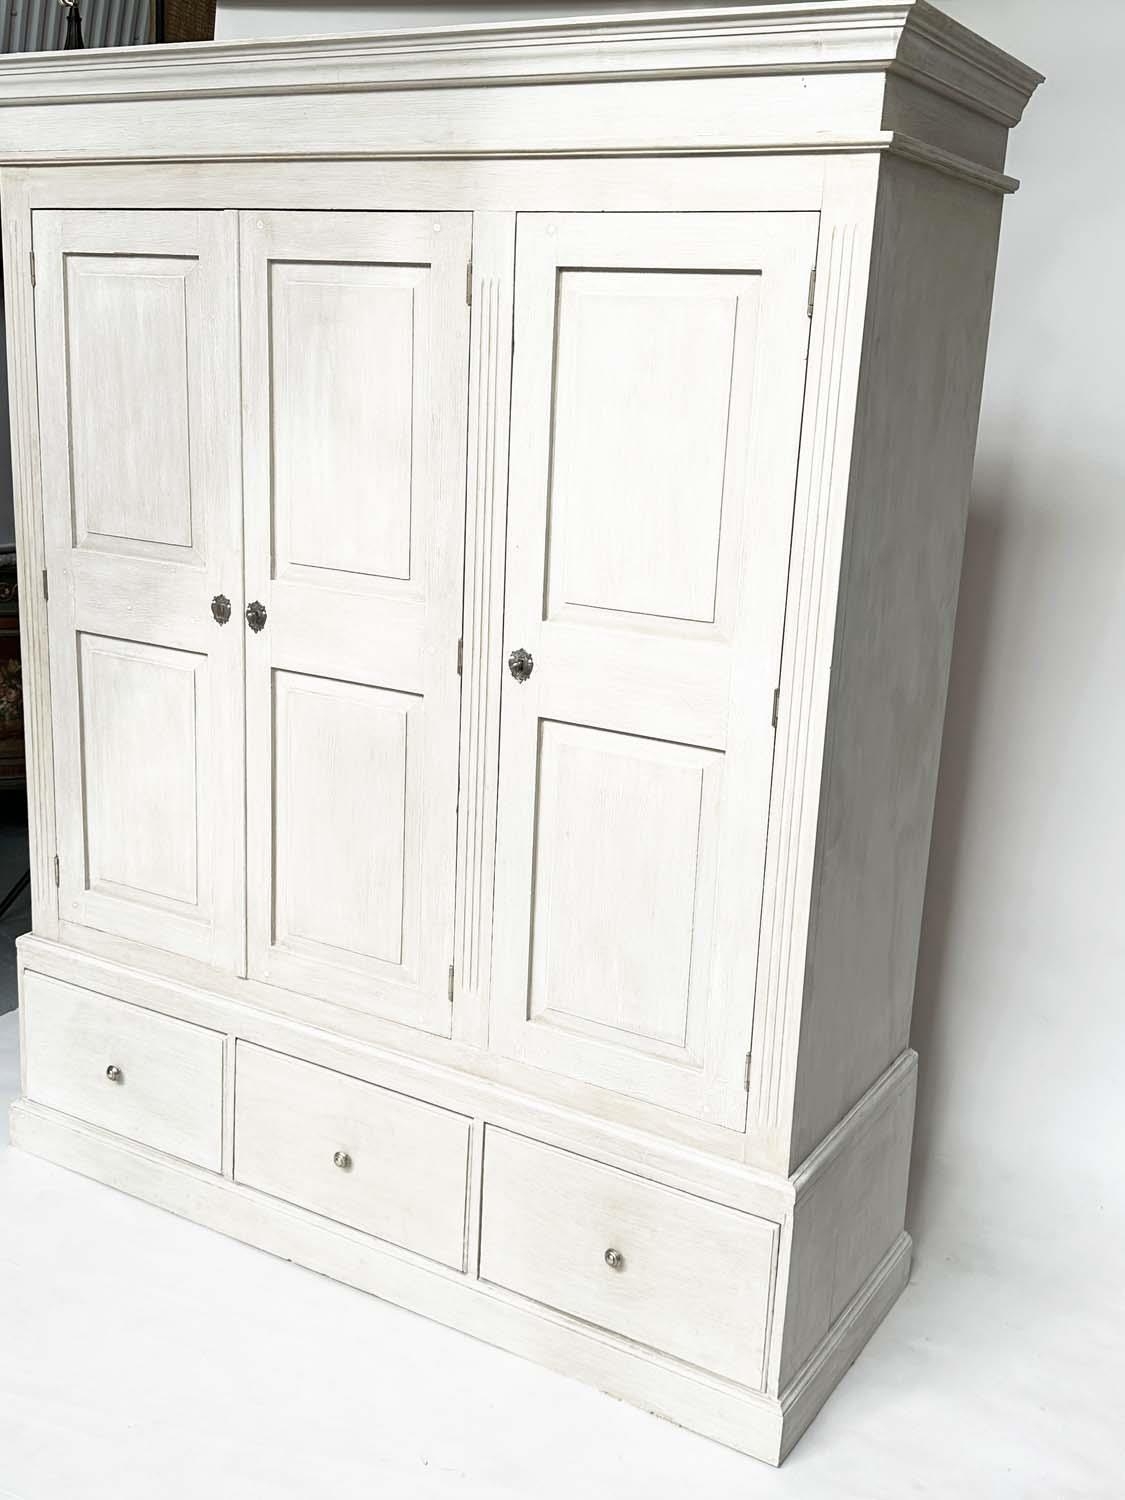 ARMOIRE, French style traditionally grey painted with three panelled doors, enclosing hanging above. - Image 11 of 11